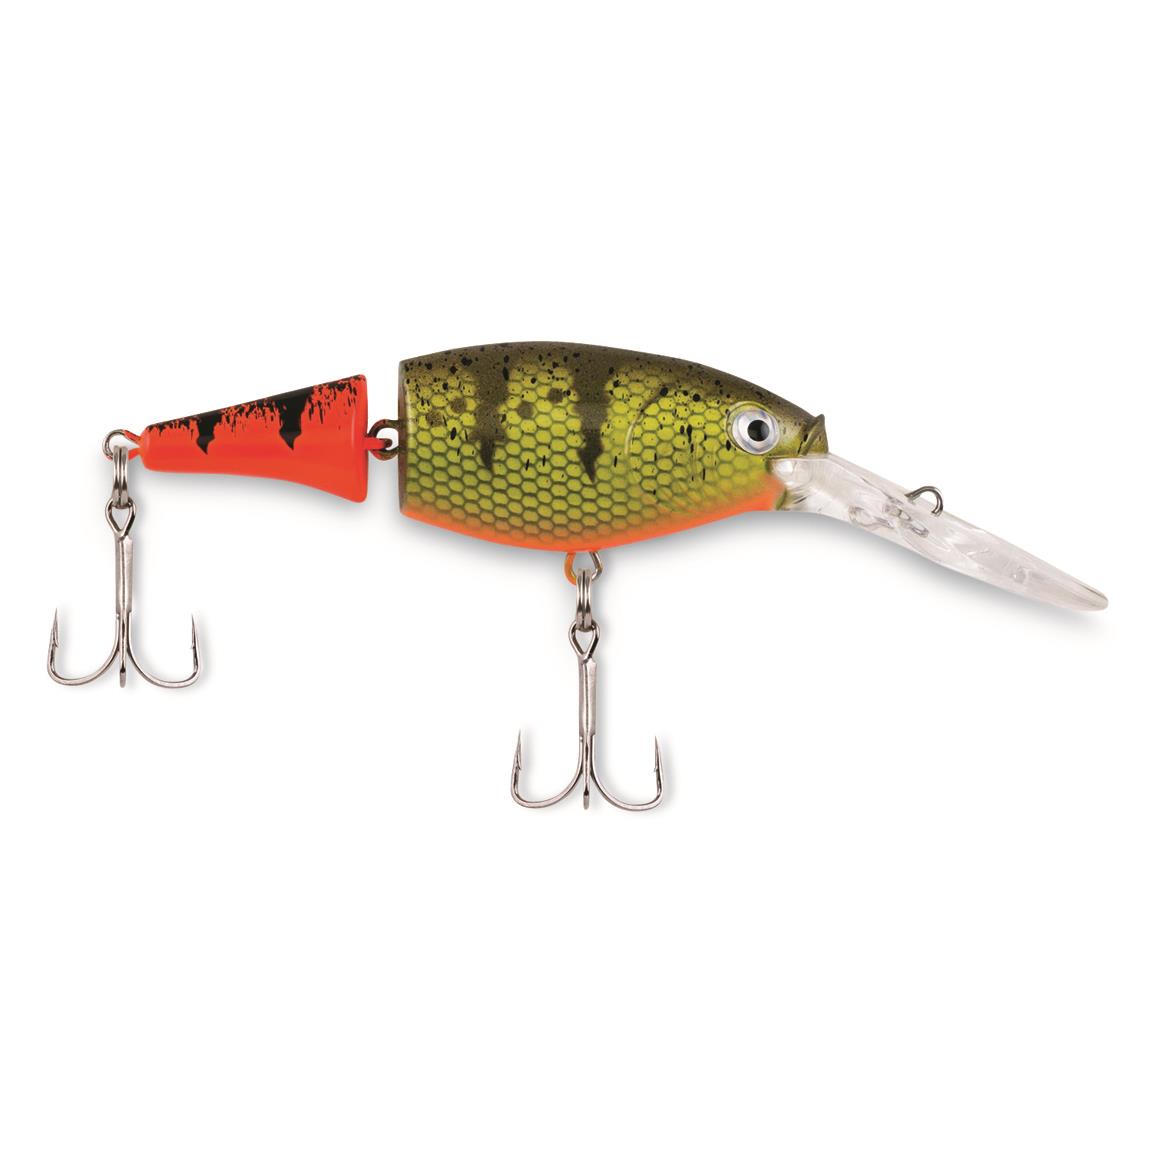 Berkley Flicker Shad Jointed Lure, Firetail Hot Perch